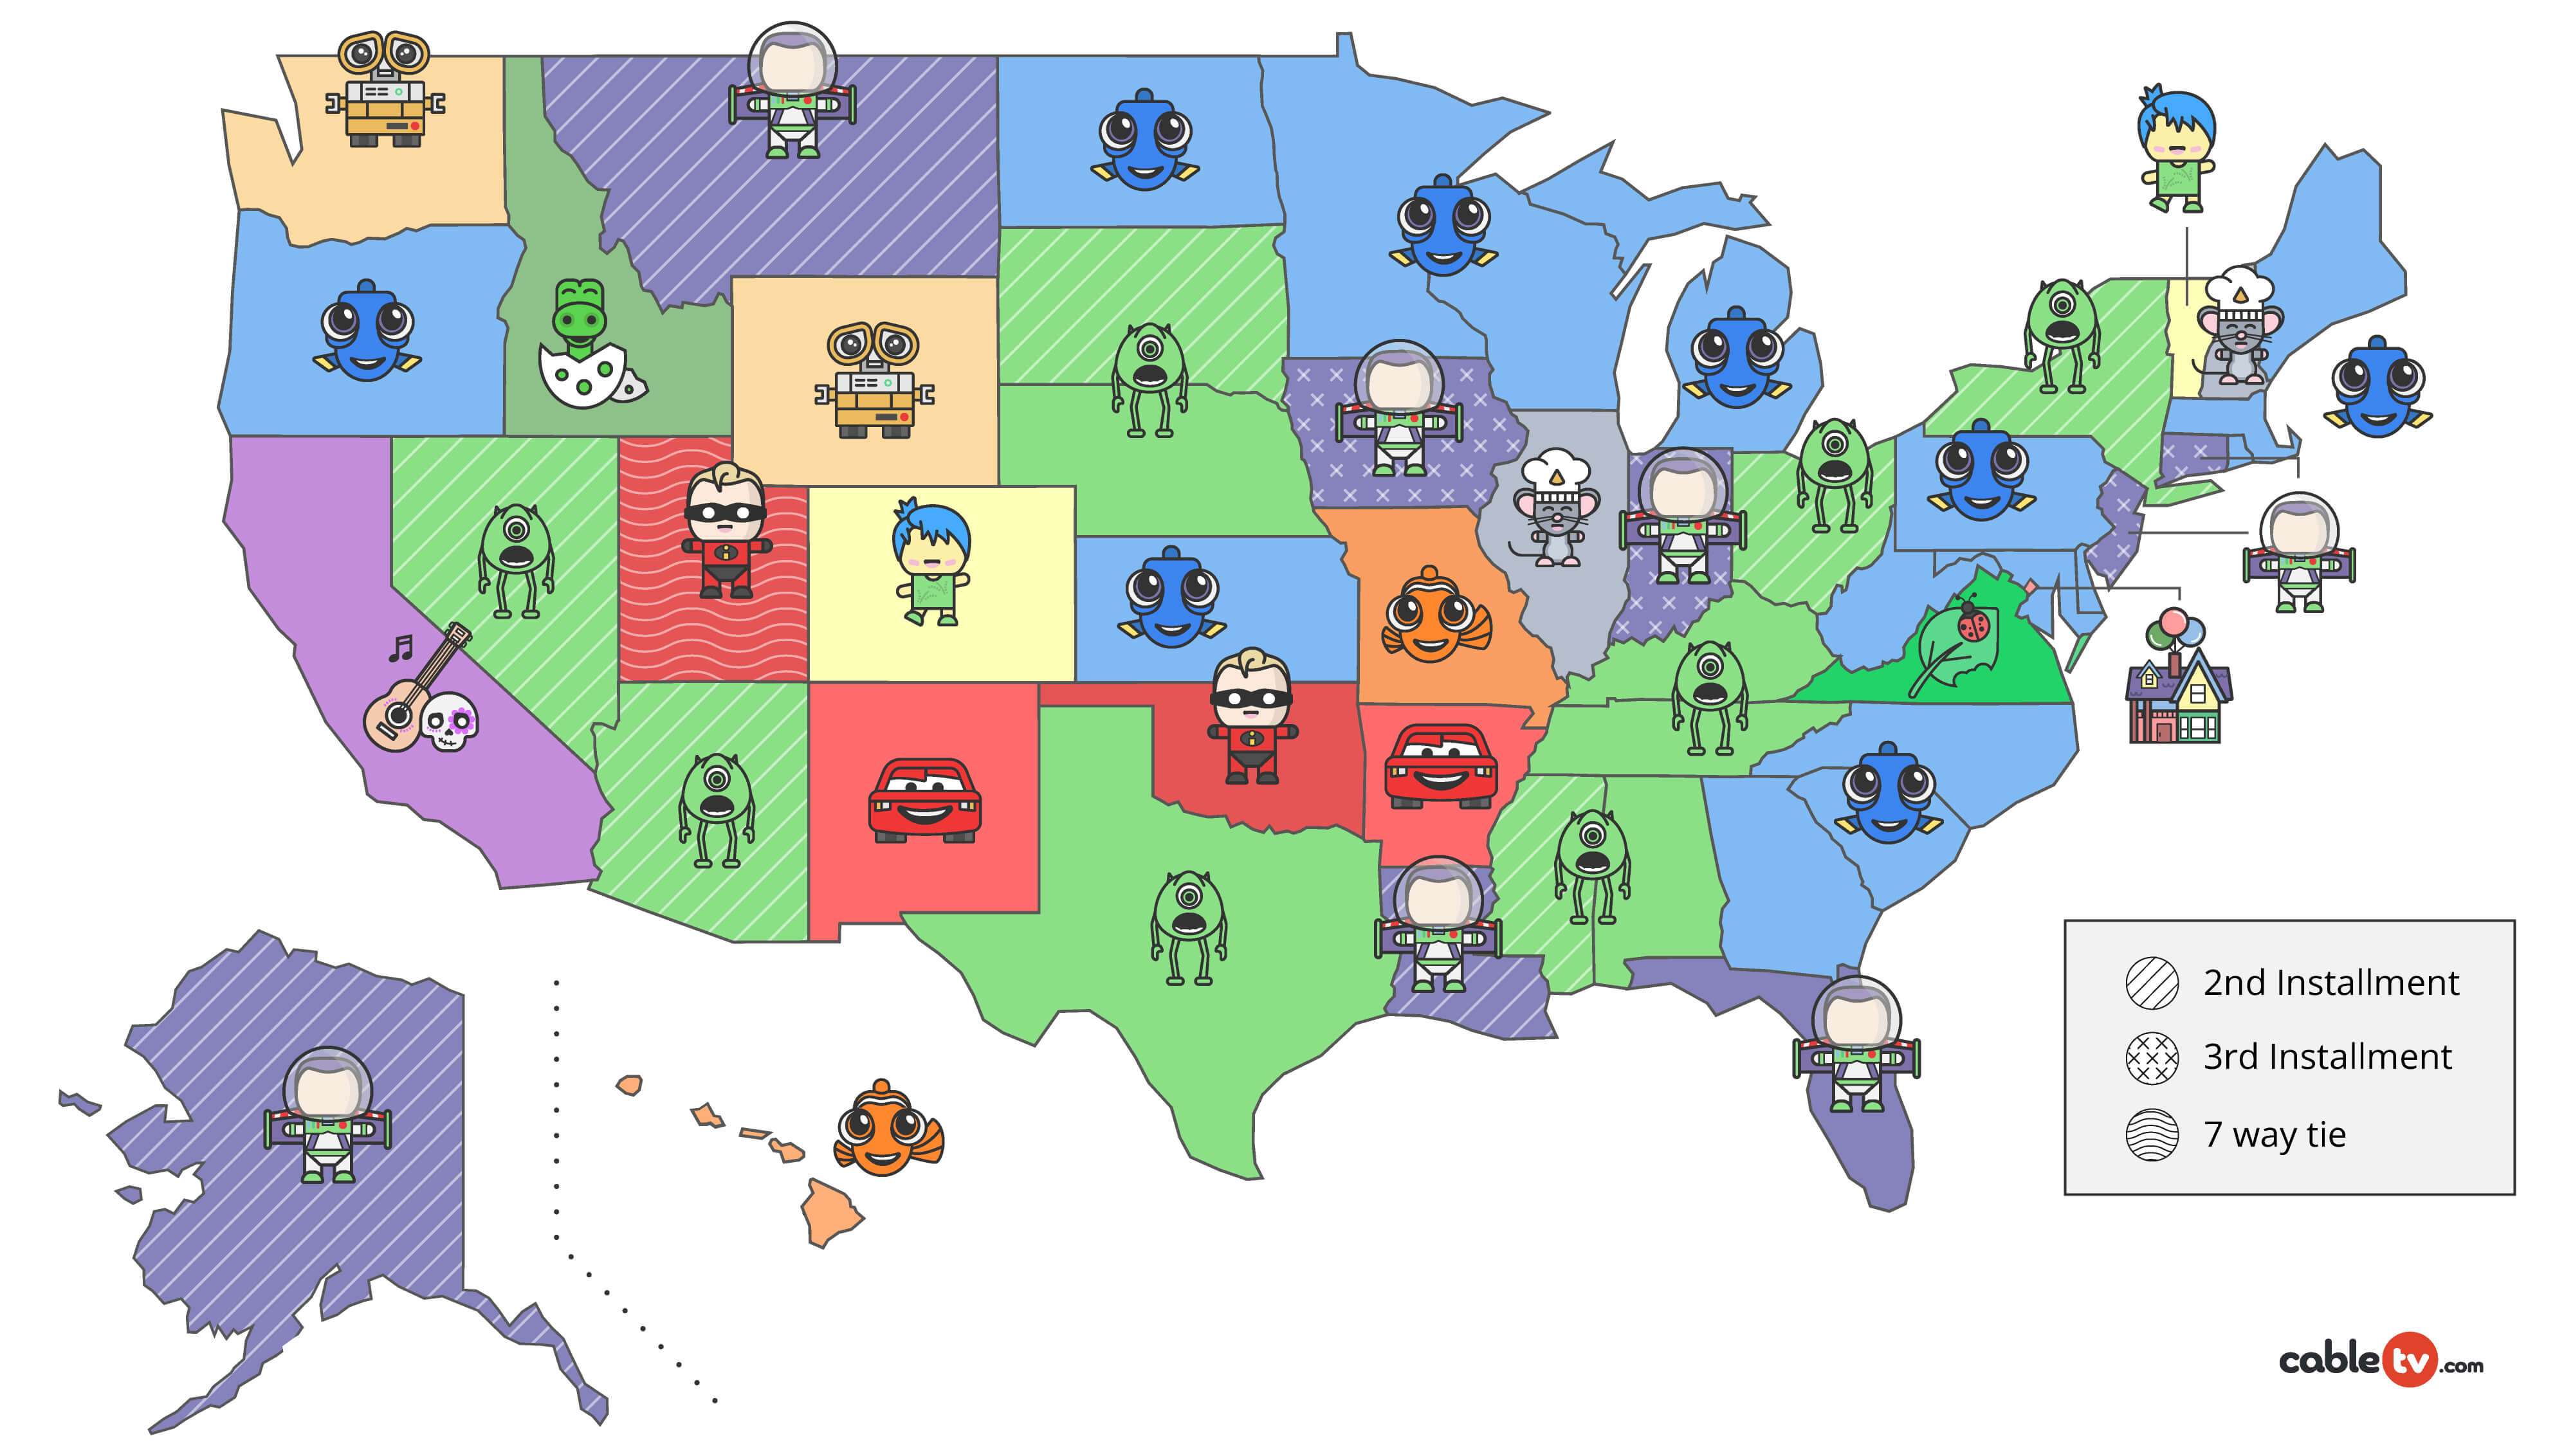 Map of The United States of America with icons on each state of that state's favorite Pixar movie.